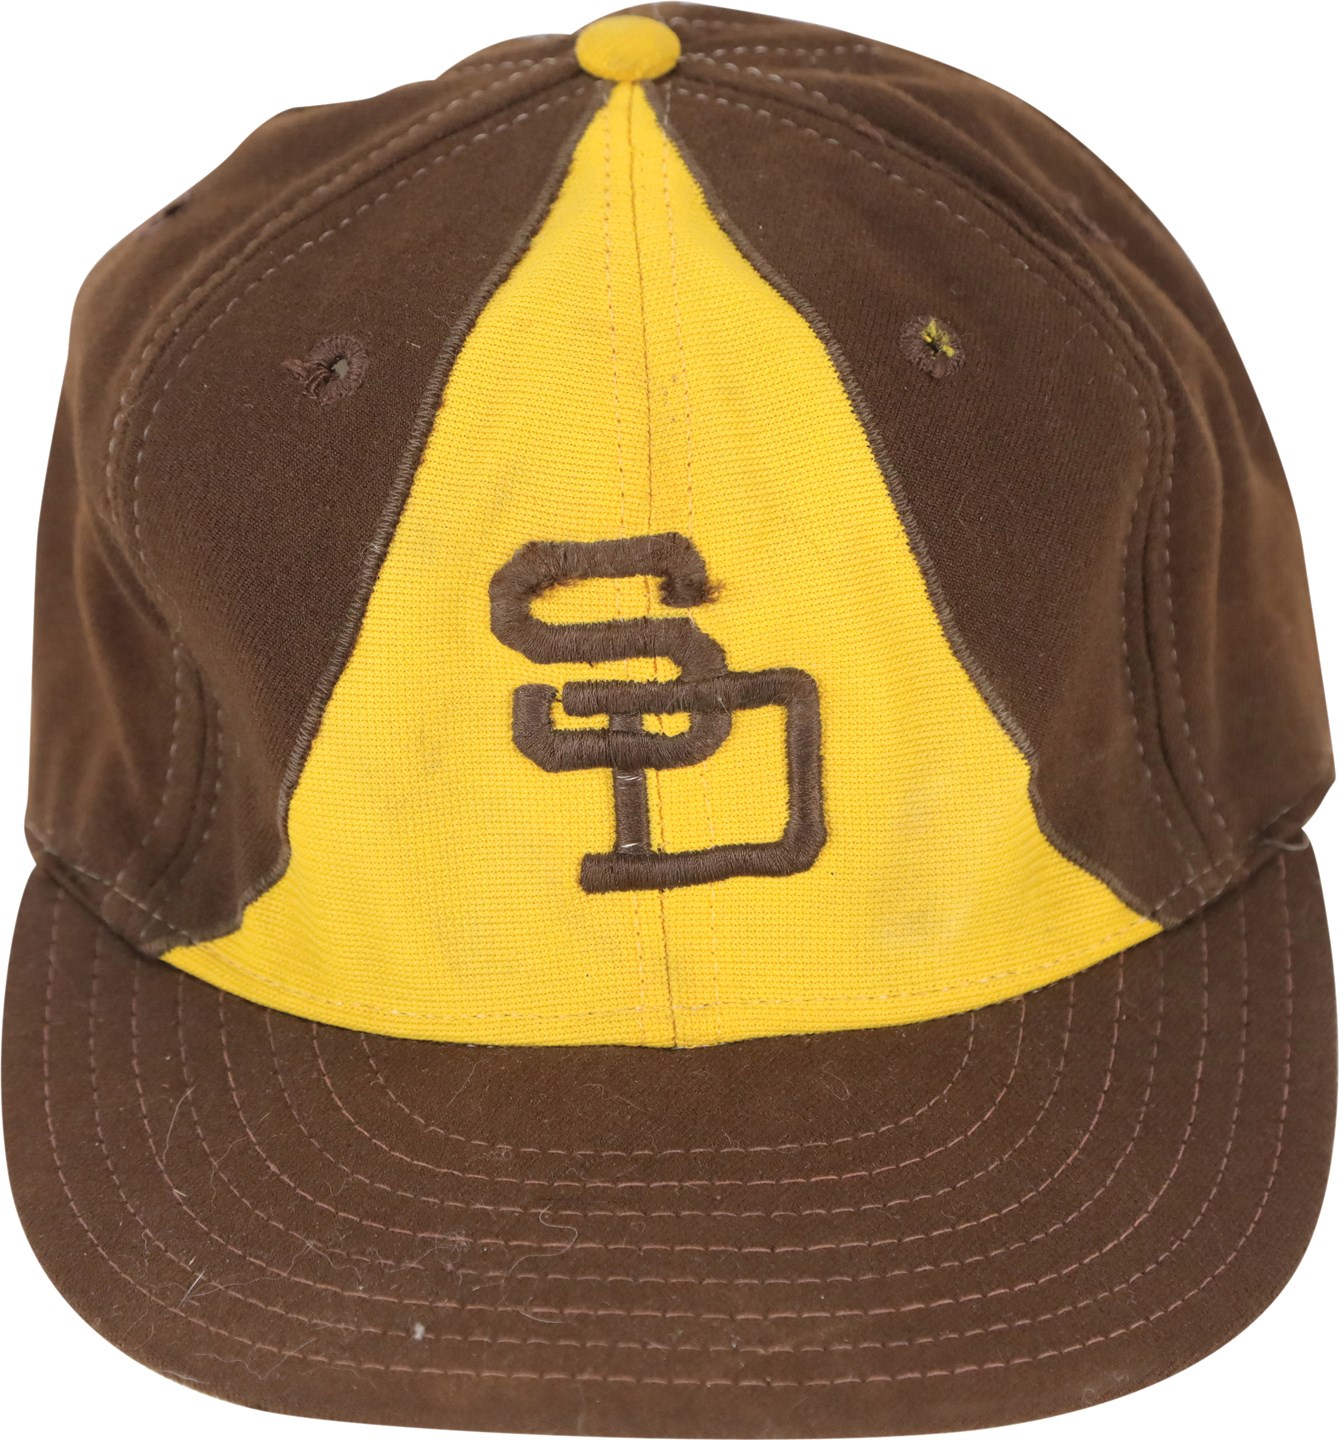 Baseball Equipment - Circa 1978 Gaylord Perry San Diego Padres Game Worn Hat